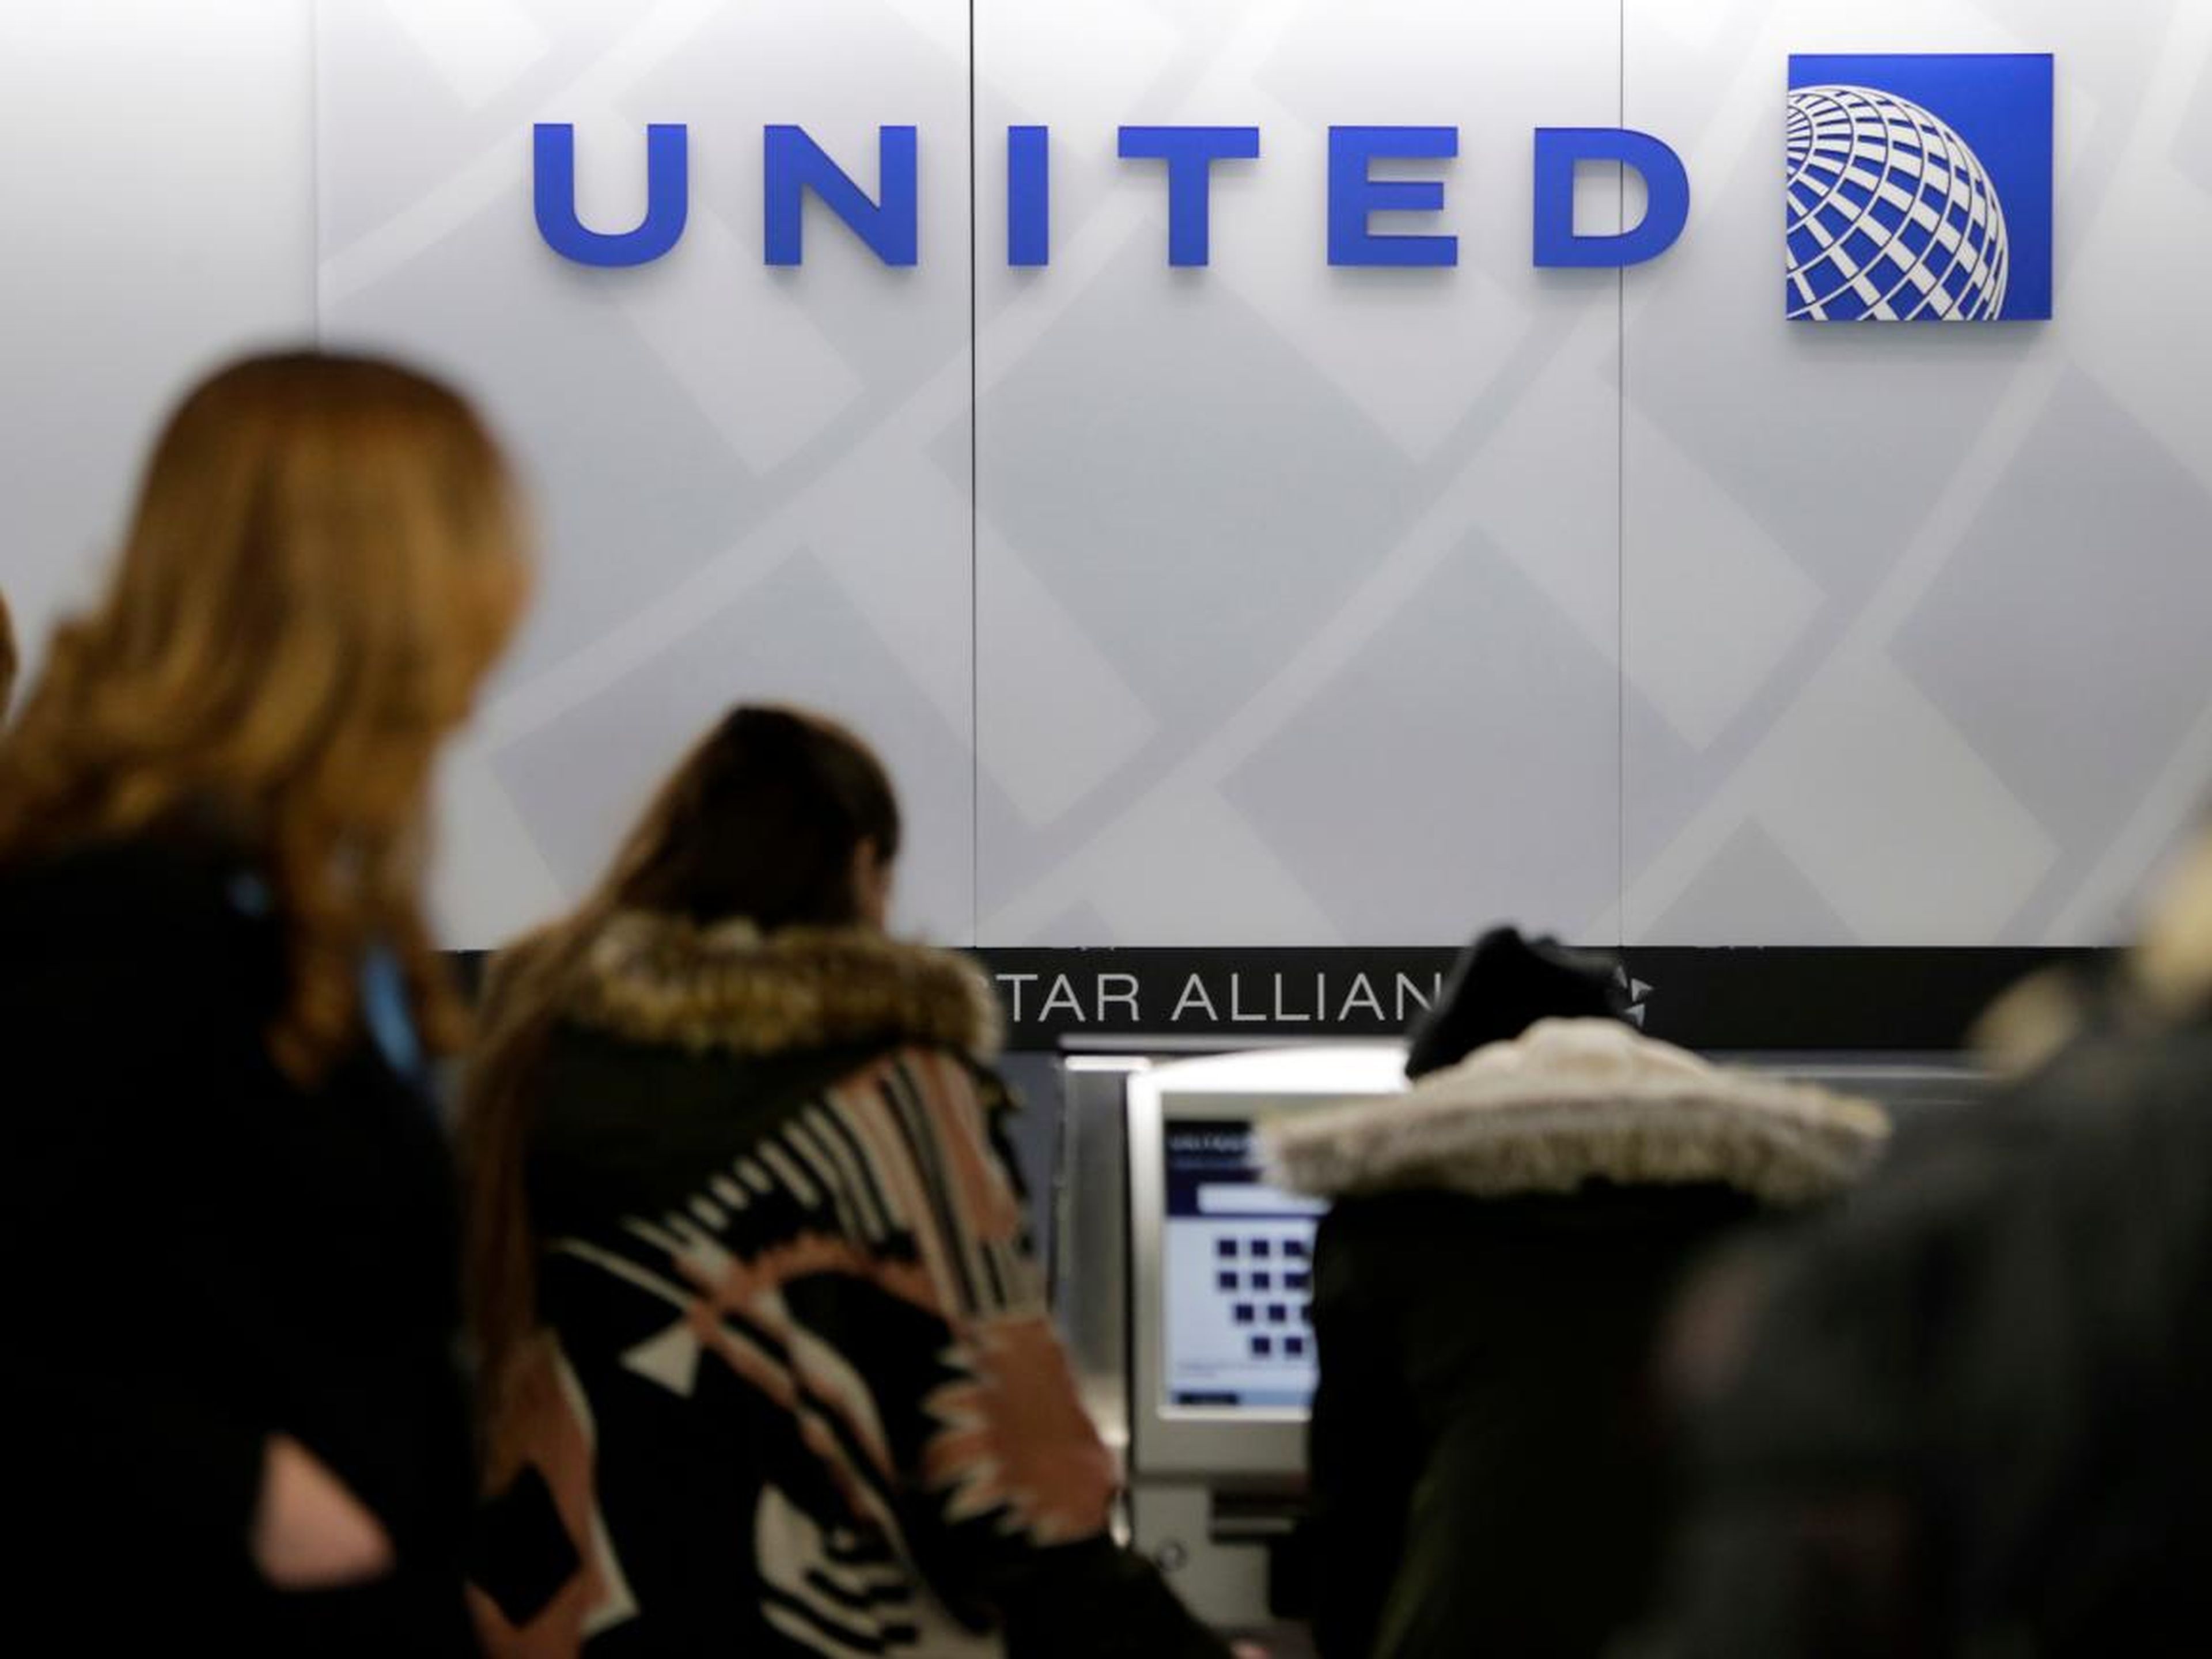 A puppy reportedly died in an overhead bin on a United Airlines flight (March)